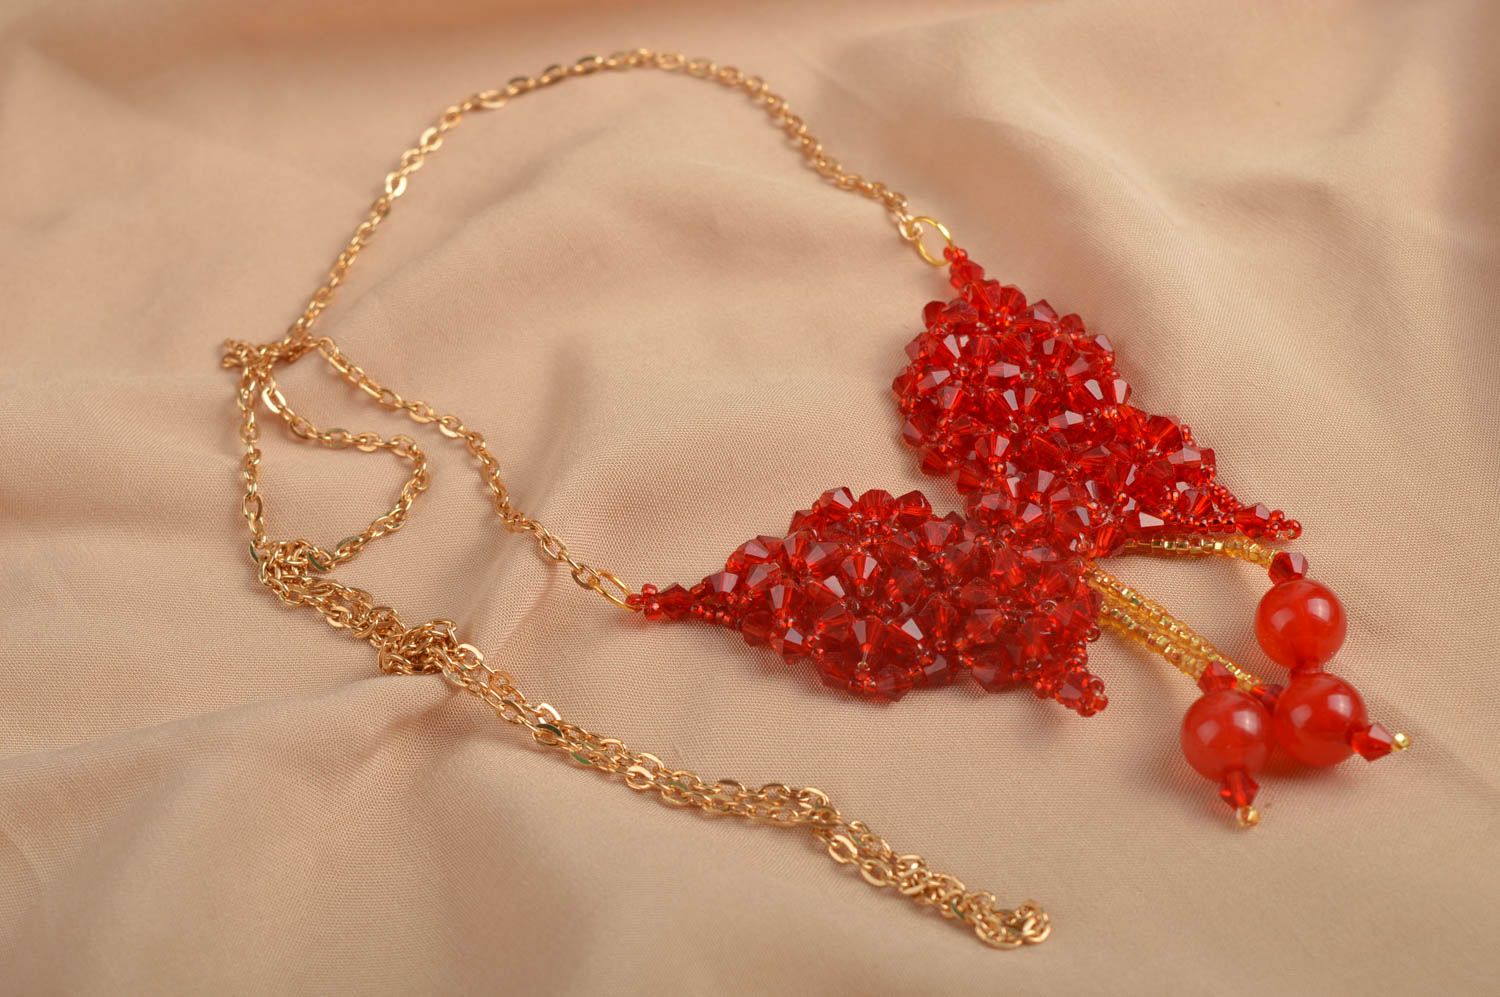 Red handmade beaded pendant necklace fashion accessories necklace design photo 1